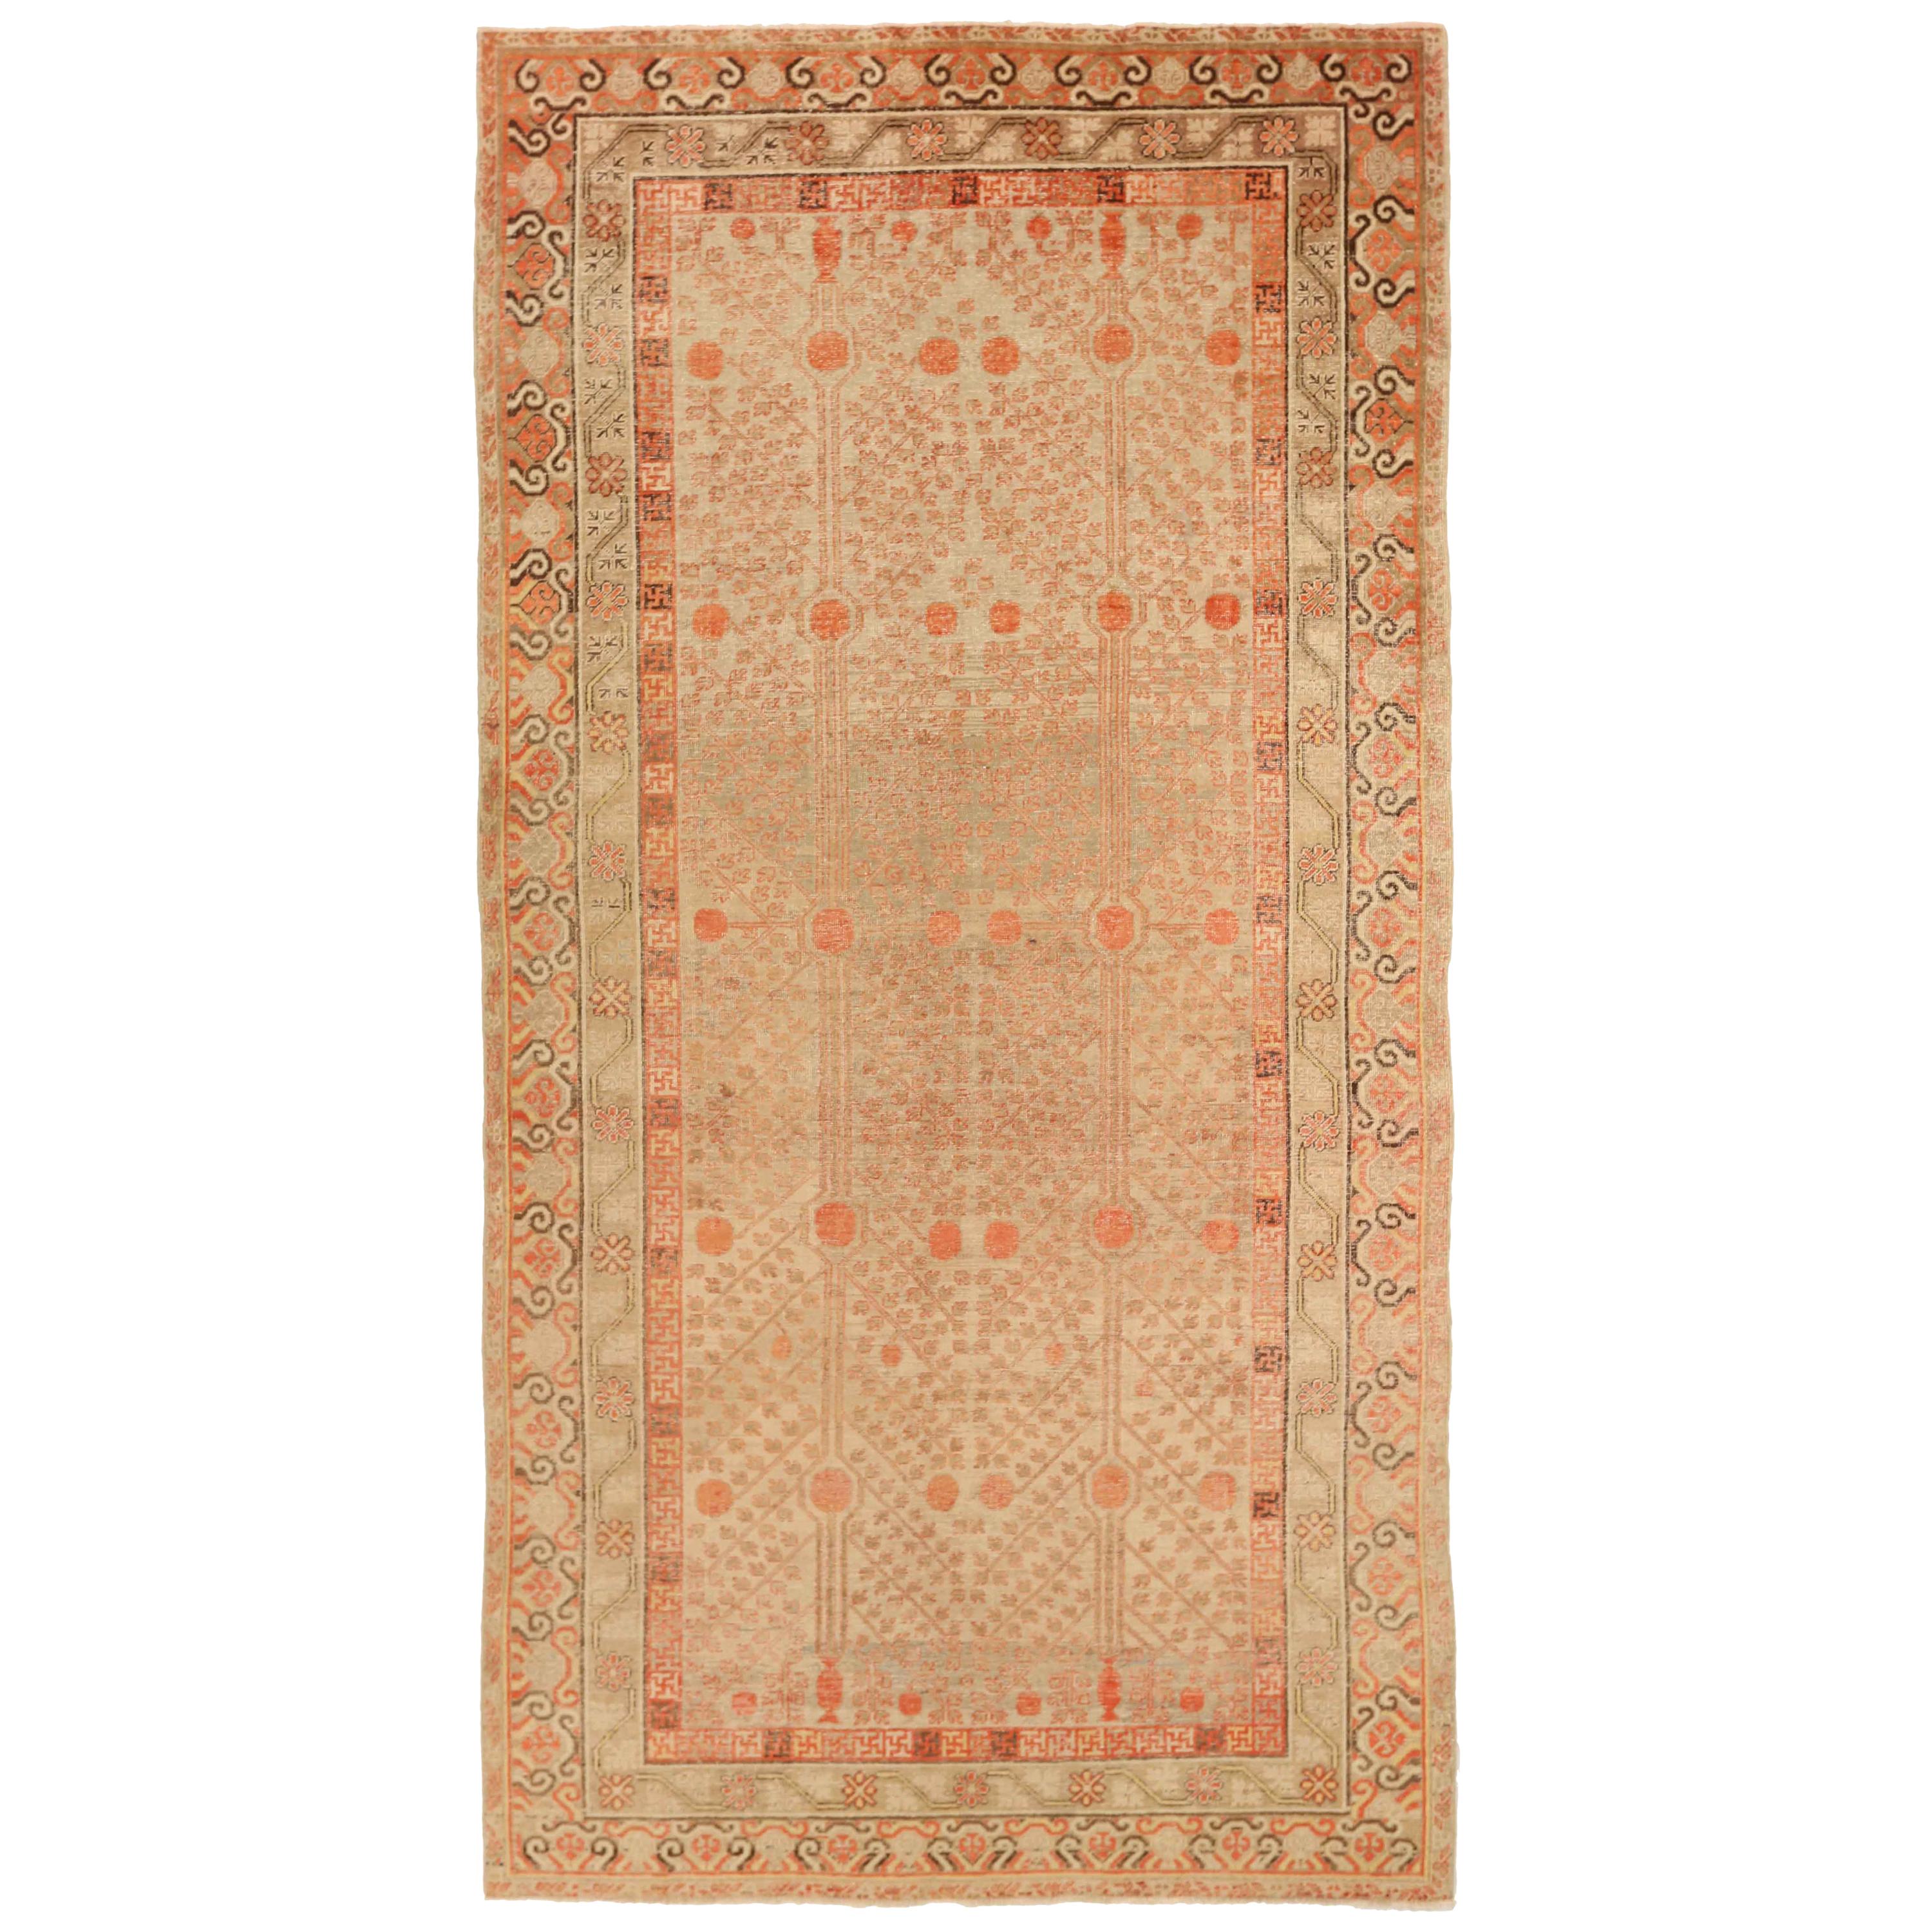 1910s Antique Central Asian Rug Khotan Style with Rust and Beige Nature Details For Sale